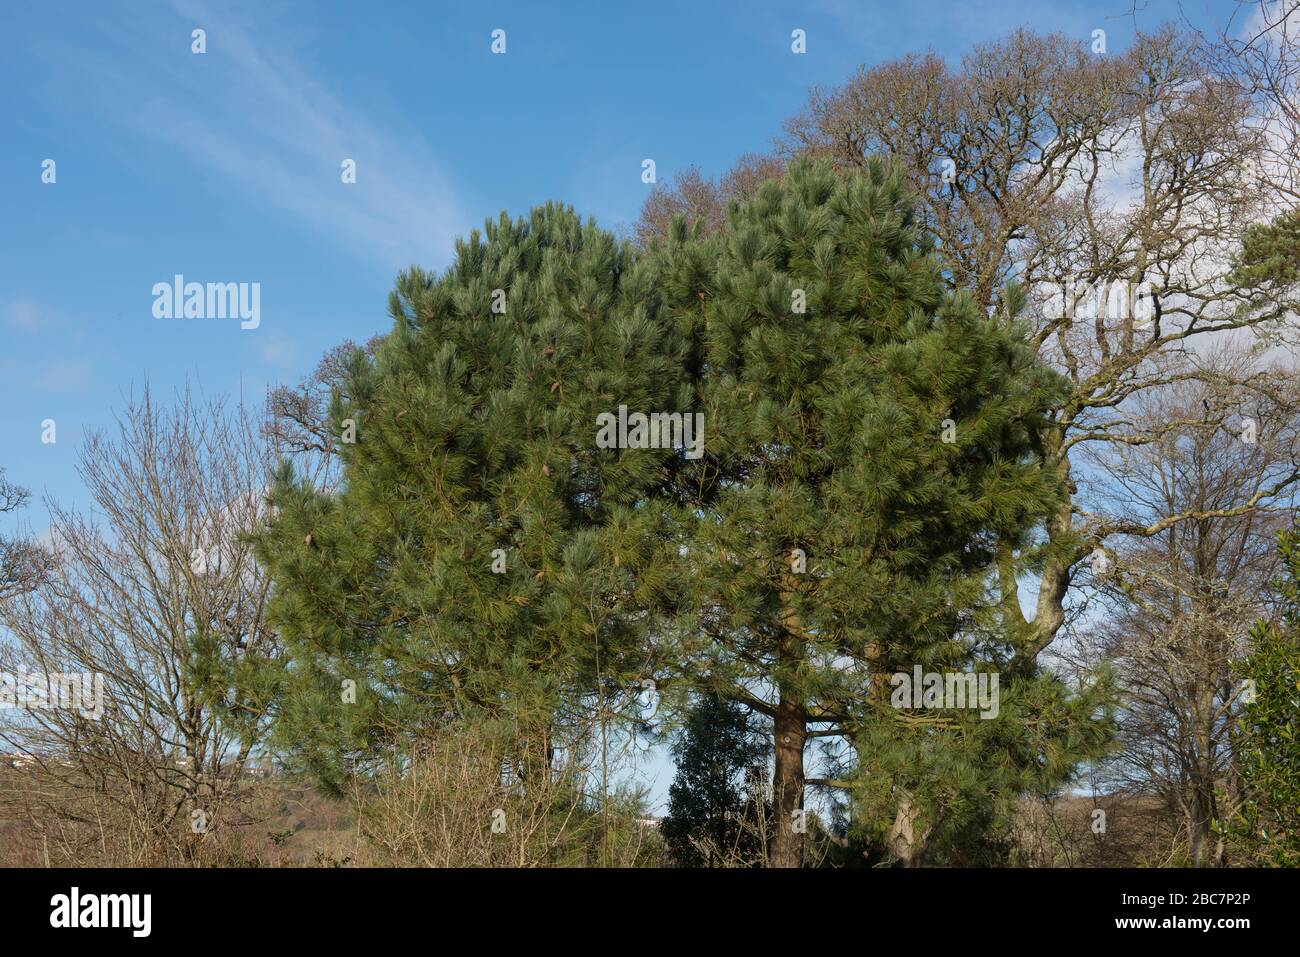 Green Foliage of the Evergreen Maritime or Cluster Pine Tree (Pinus pinaster) with a Bright Blue Sky Background in a Woodland Garden Stock Photo